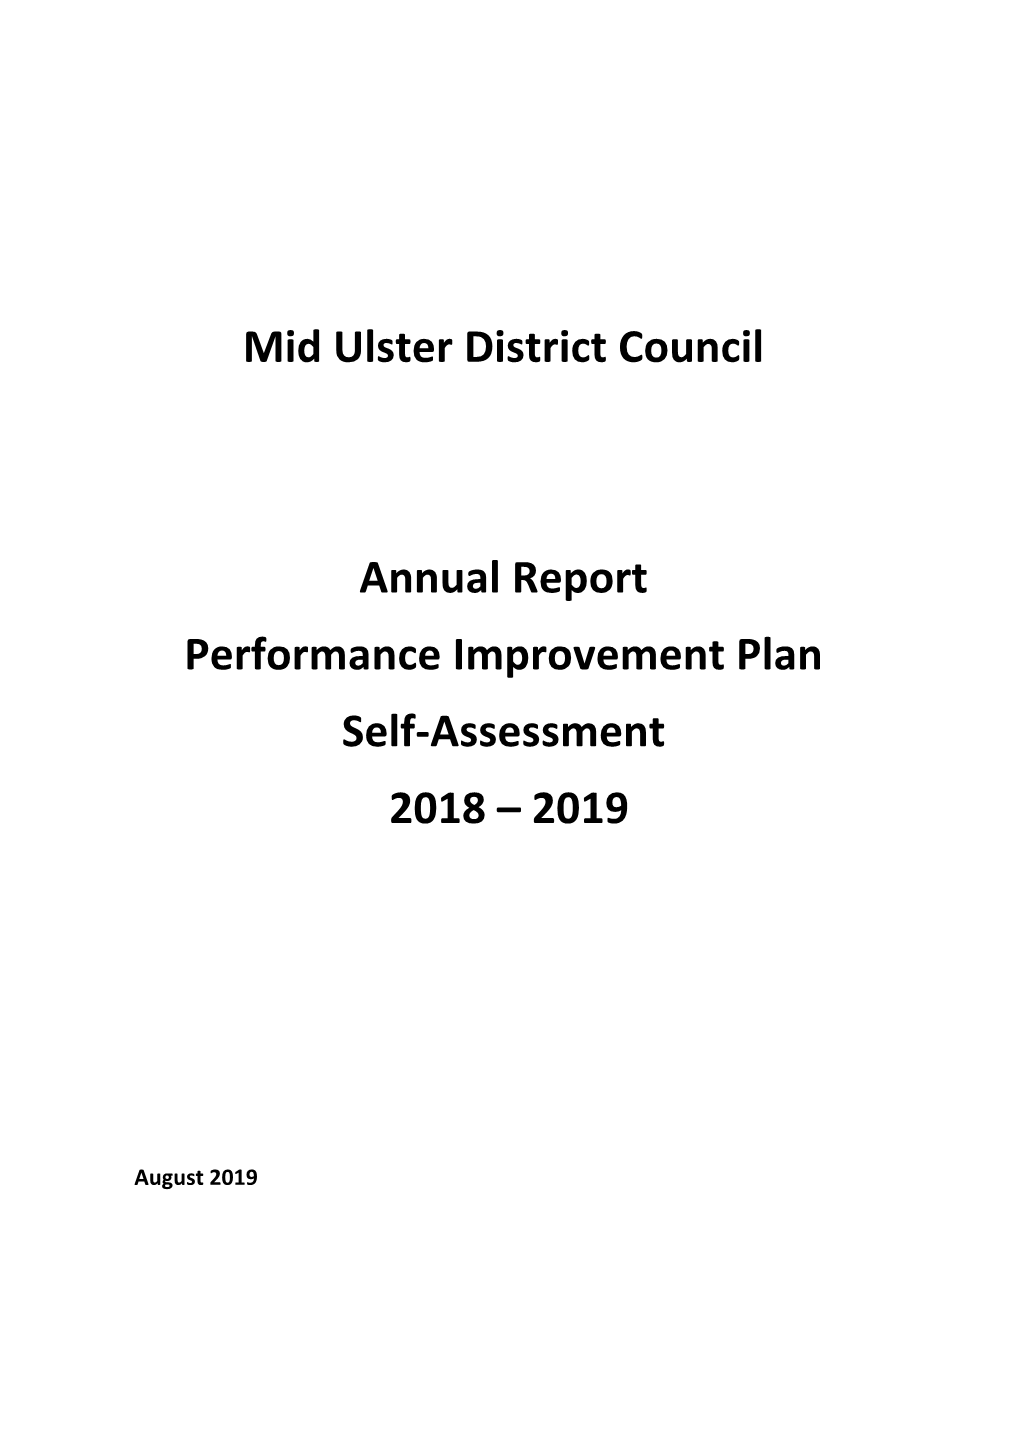 Mid Ulster District Council Annual Report Performance Improvement